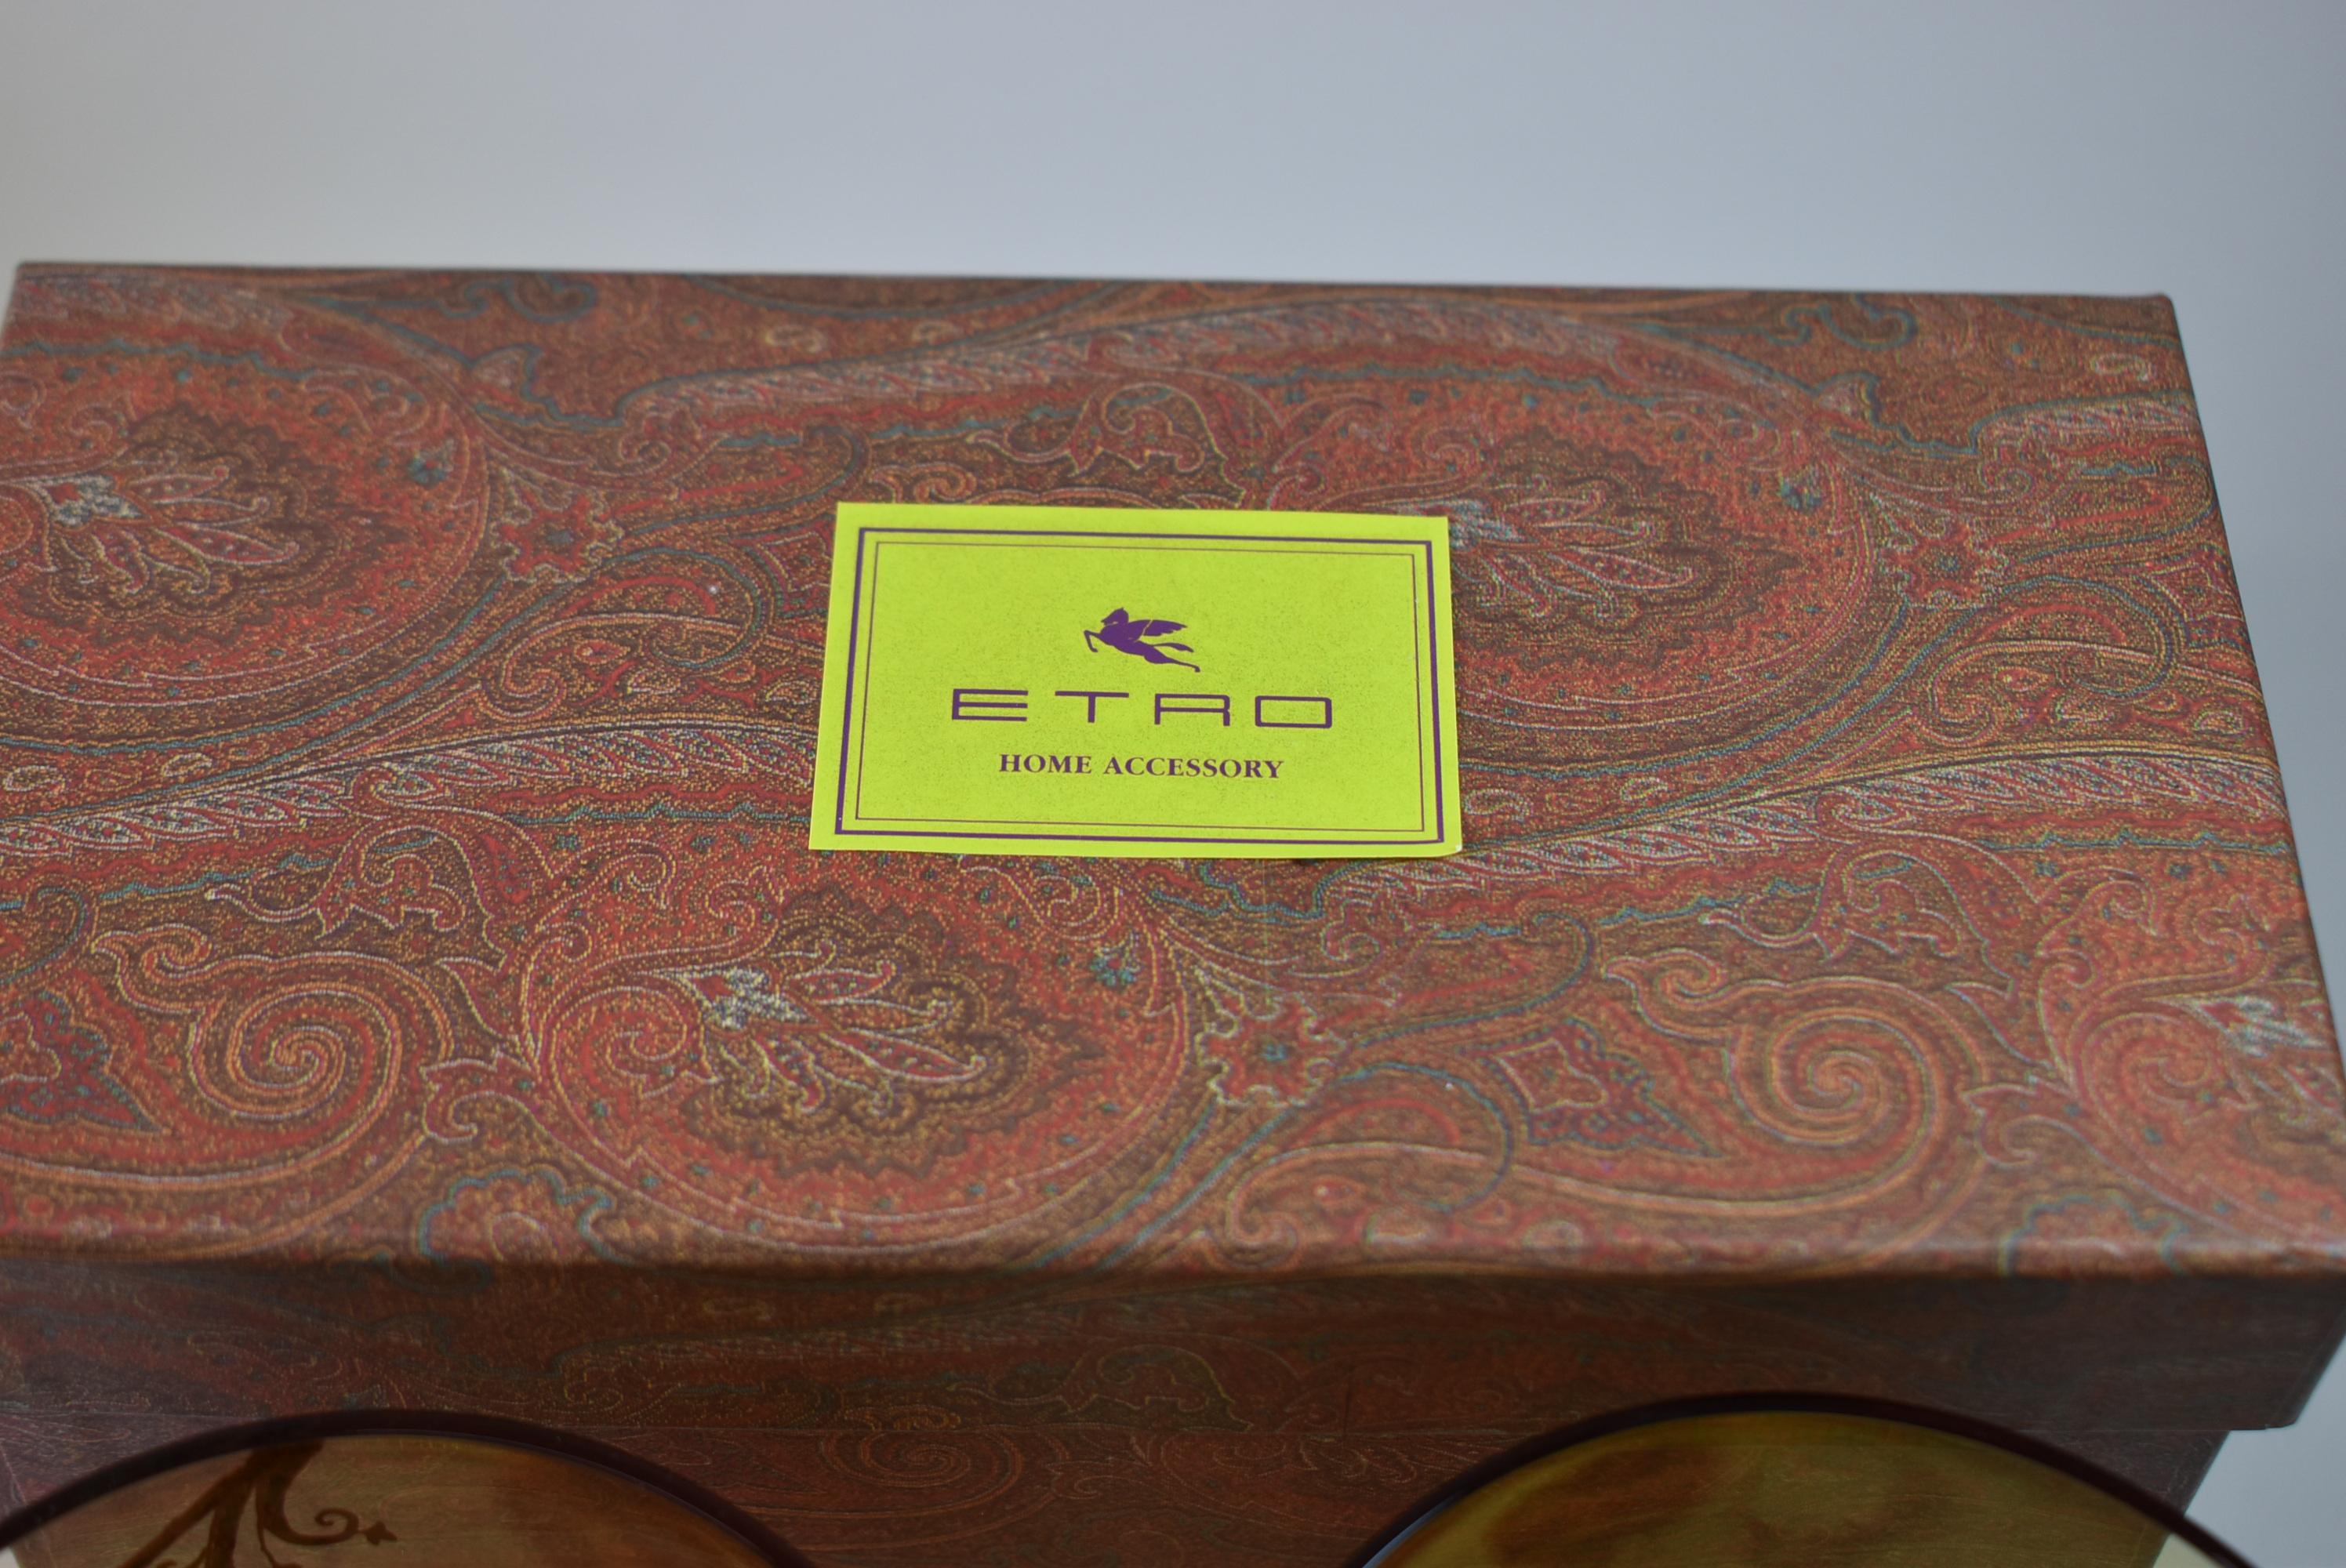 Faux ostrich leather and wood paisley tray made in Italy by Etro Home Accessories. Very nice condition with original box. Dimensions: 16